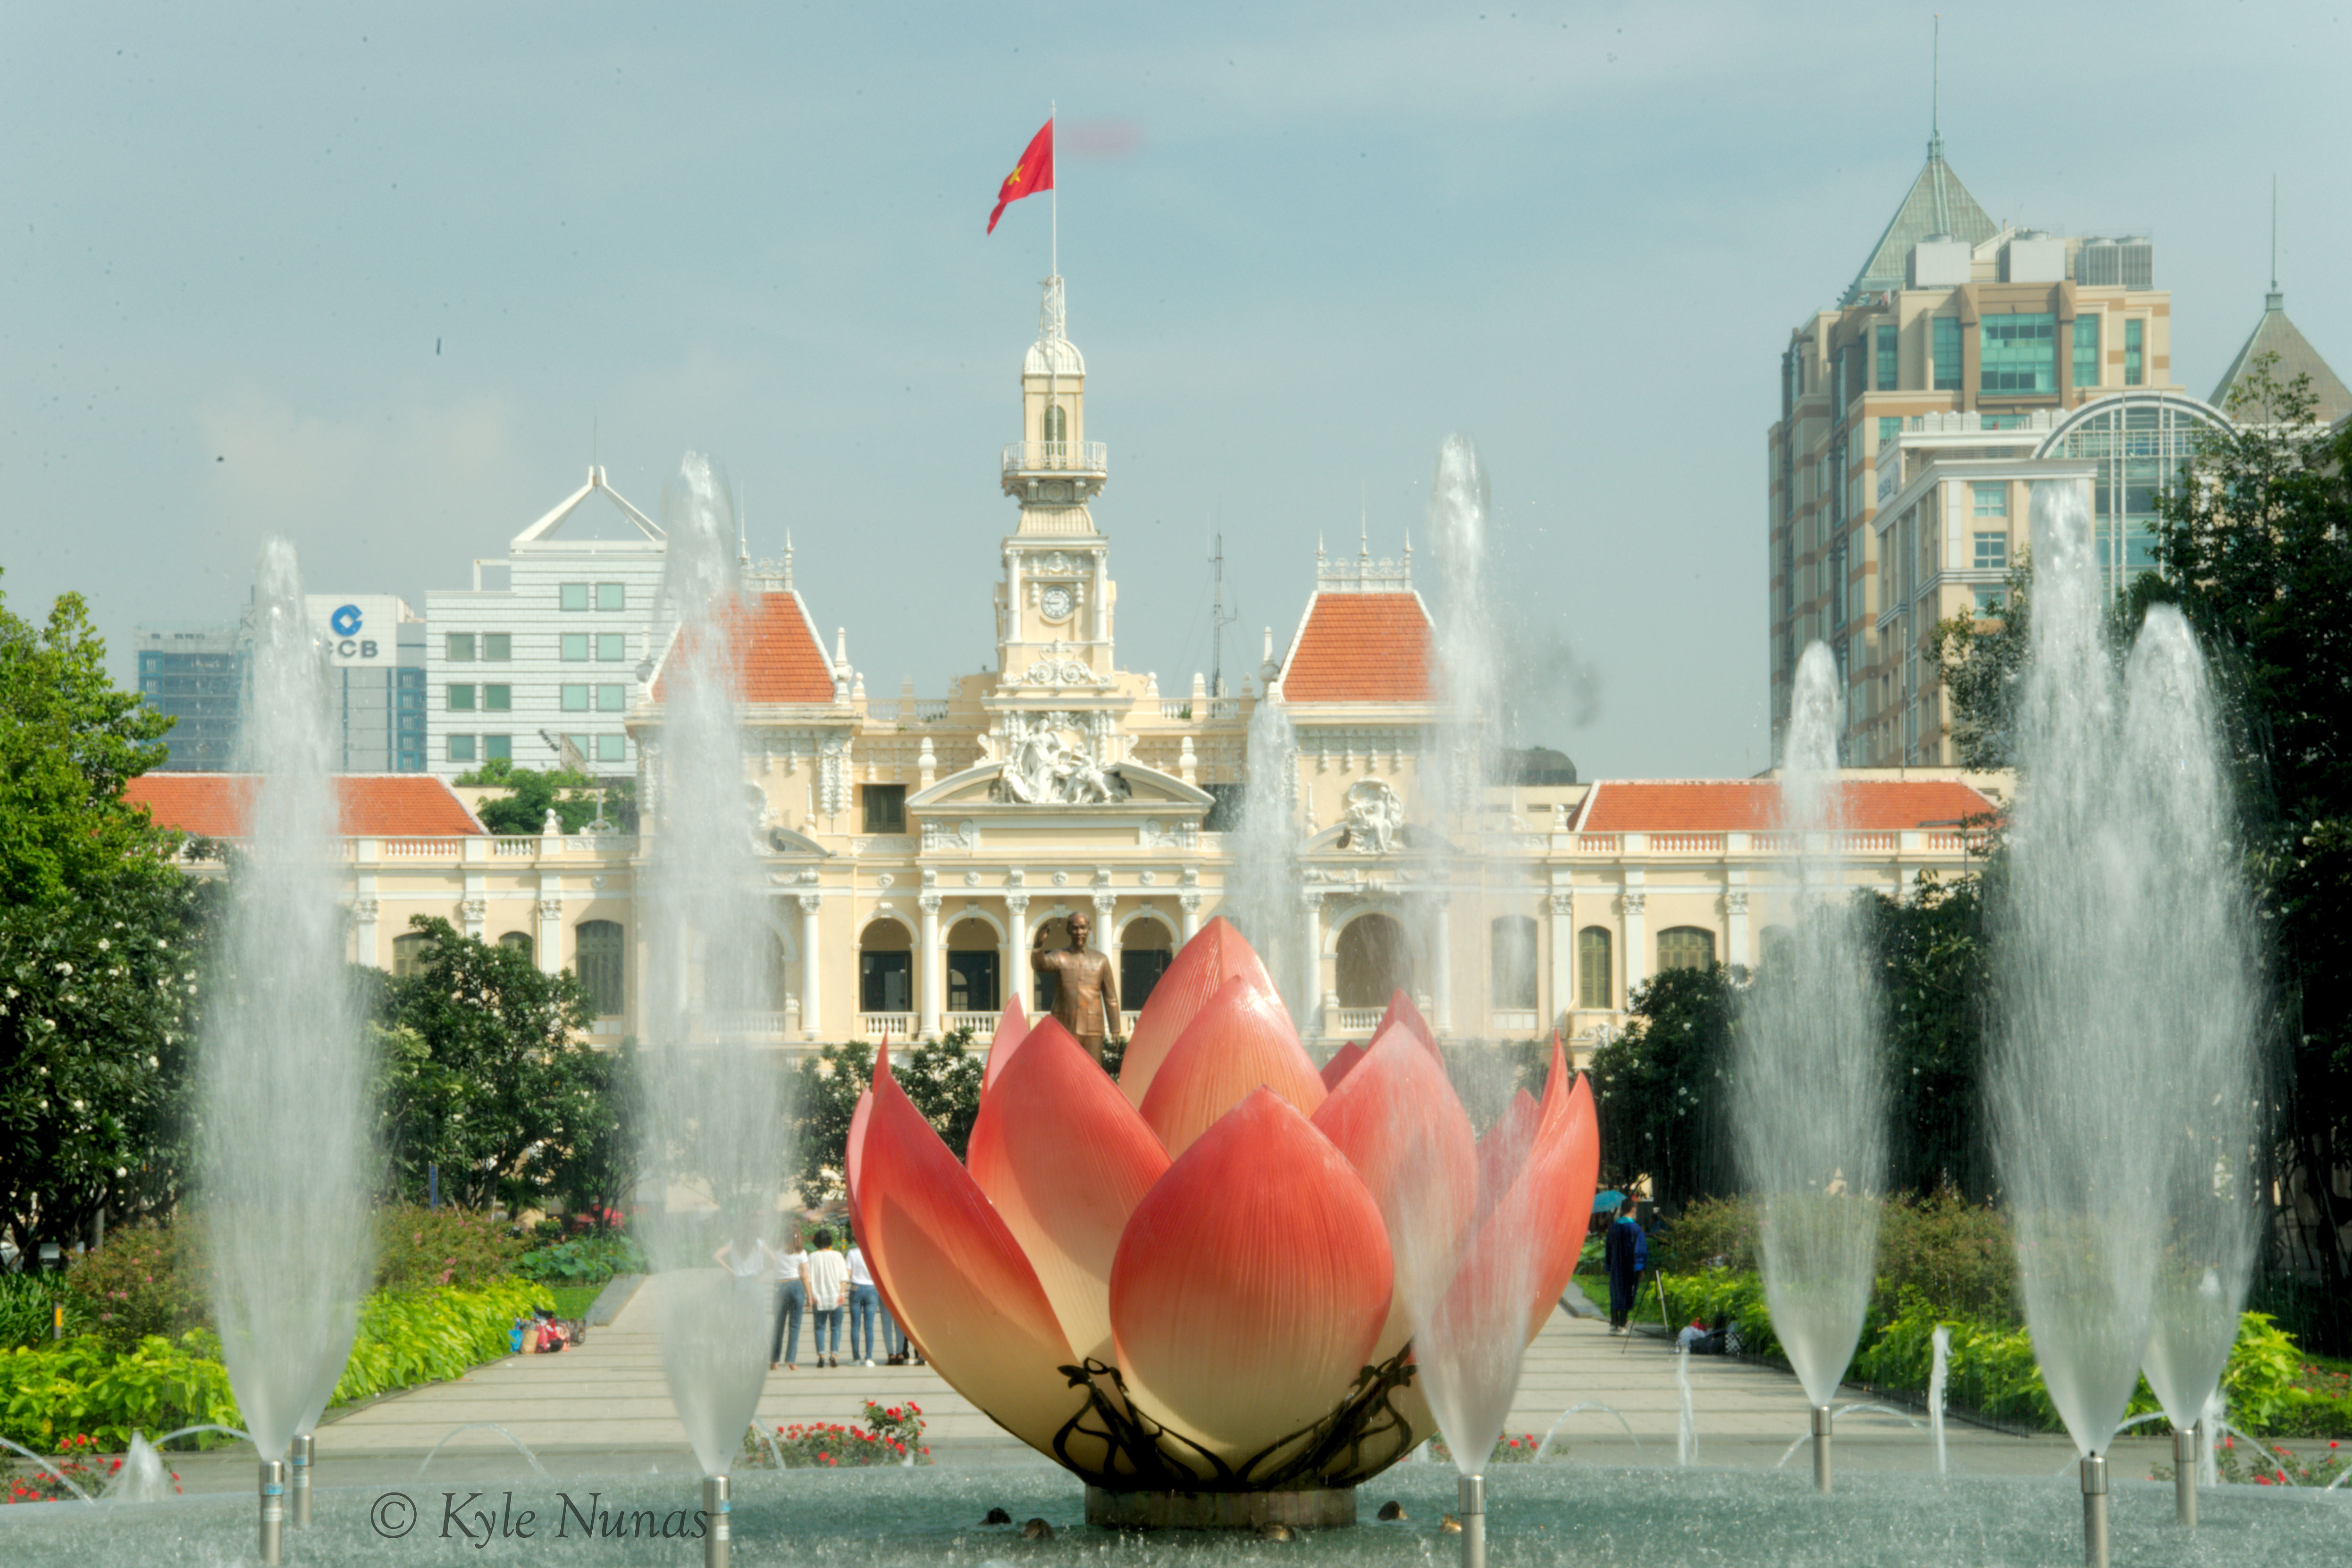 Ho Chi Minh City People's Committee building is seen in a 2020 photo taken by Kyle Nunas from Nguyen Hue Street in District 1.